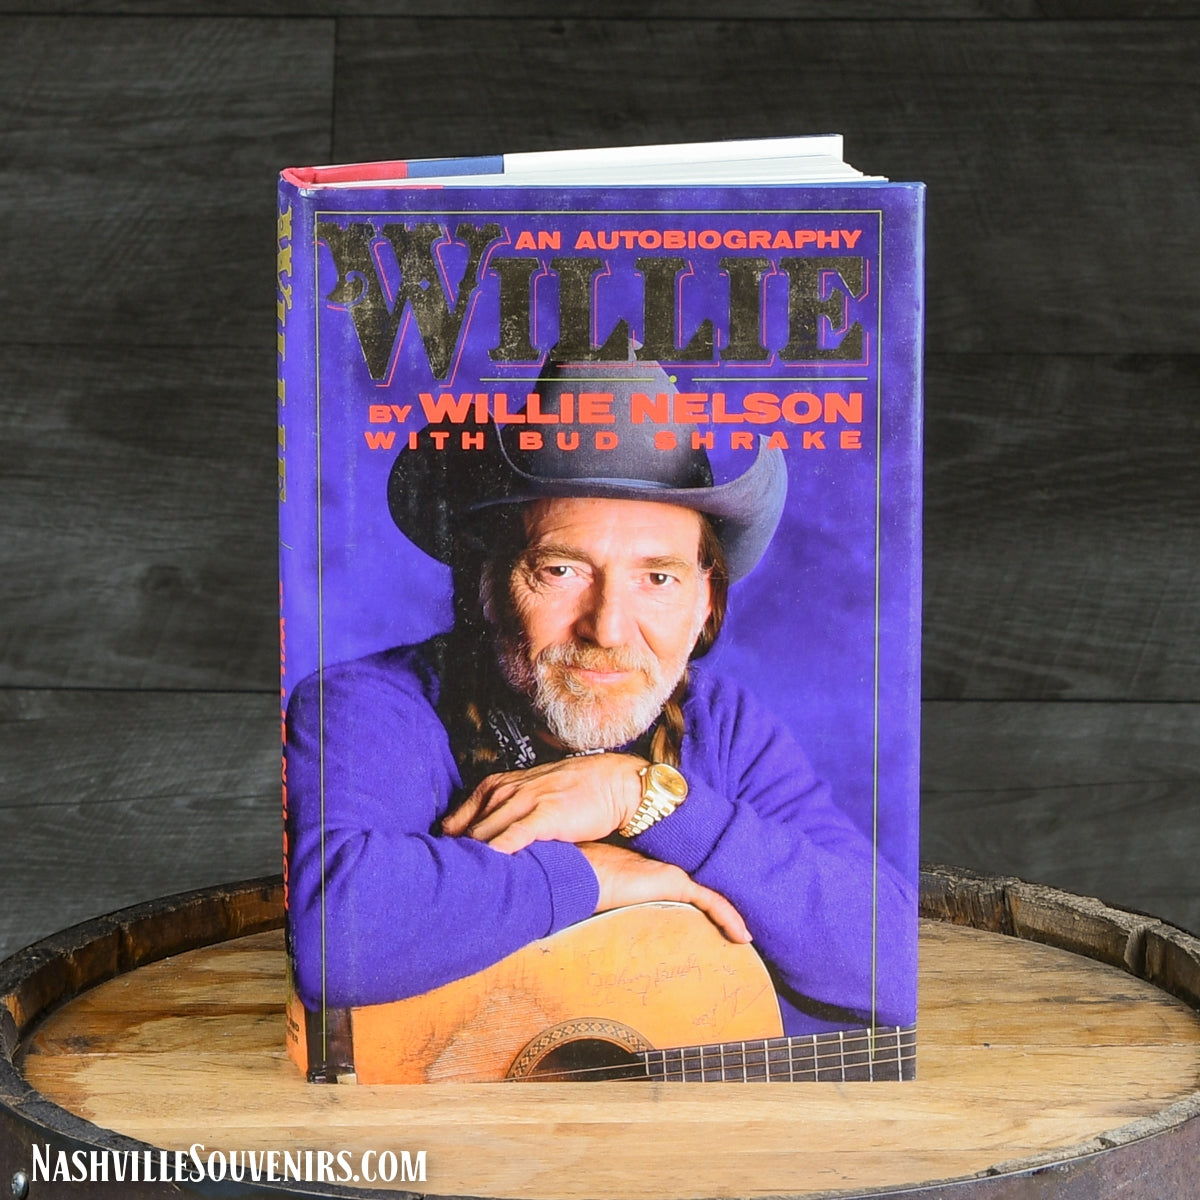 "An Autobiography" by Willie Nelson book